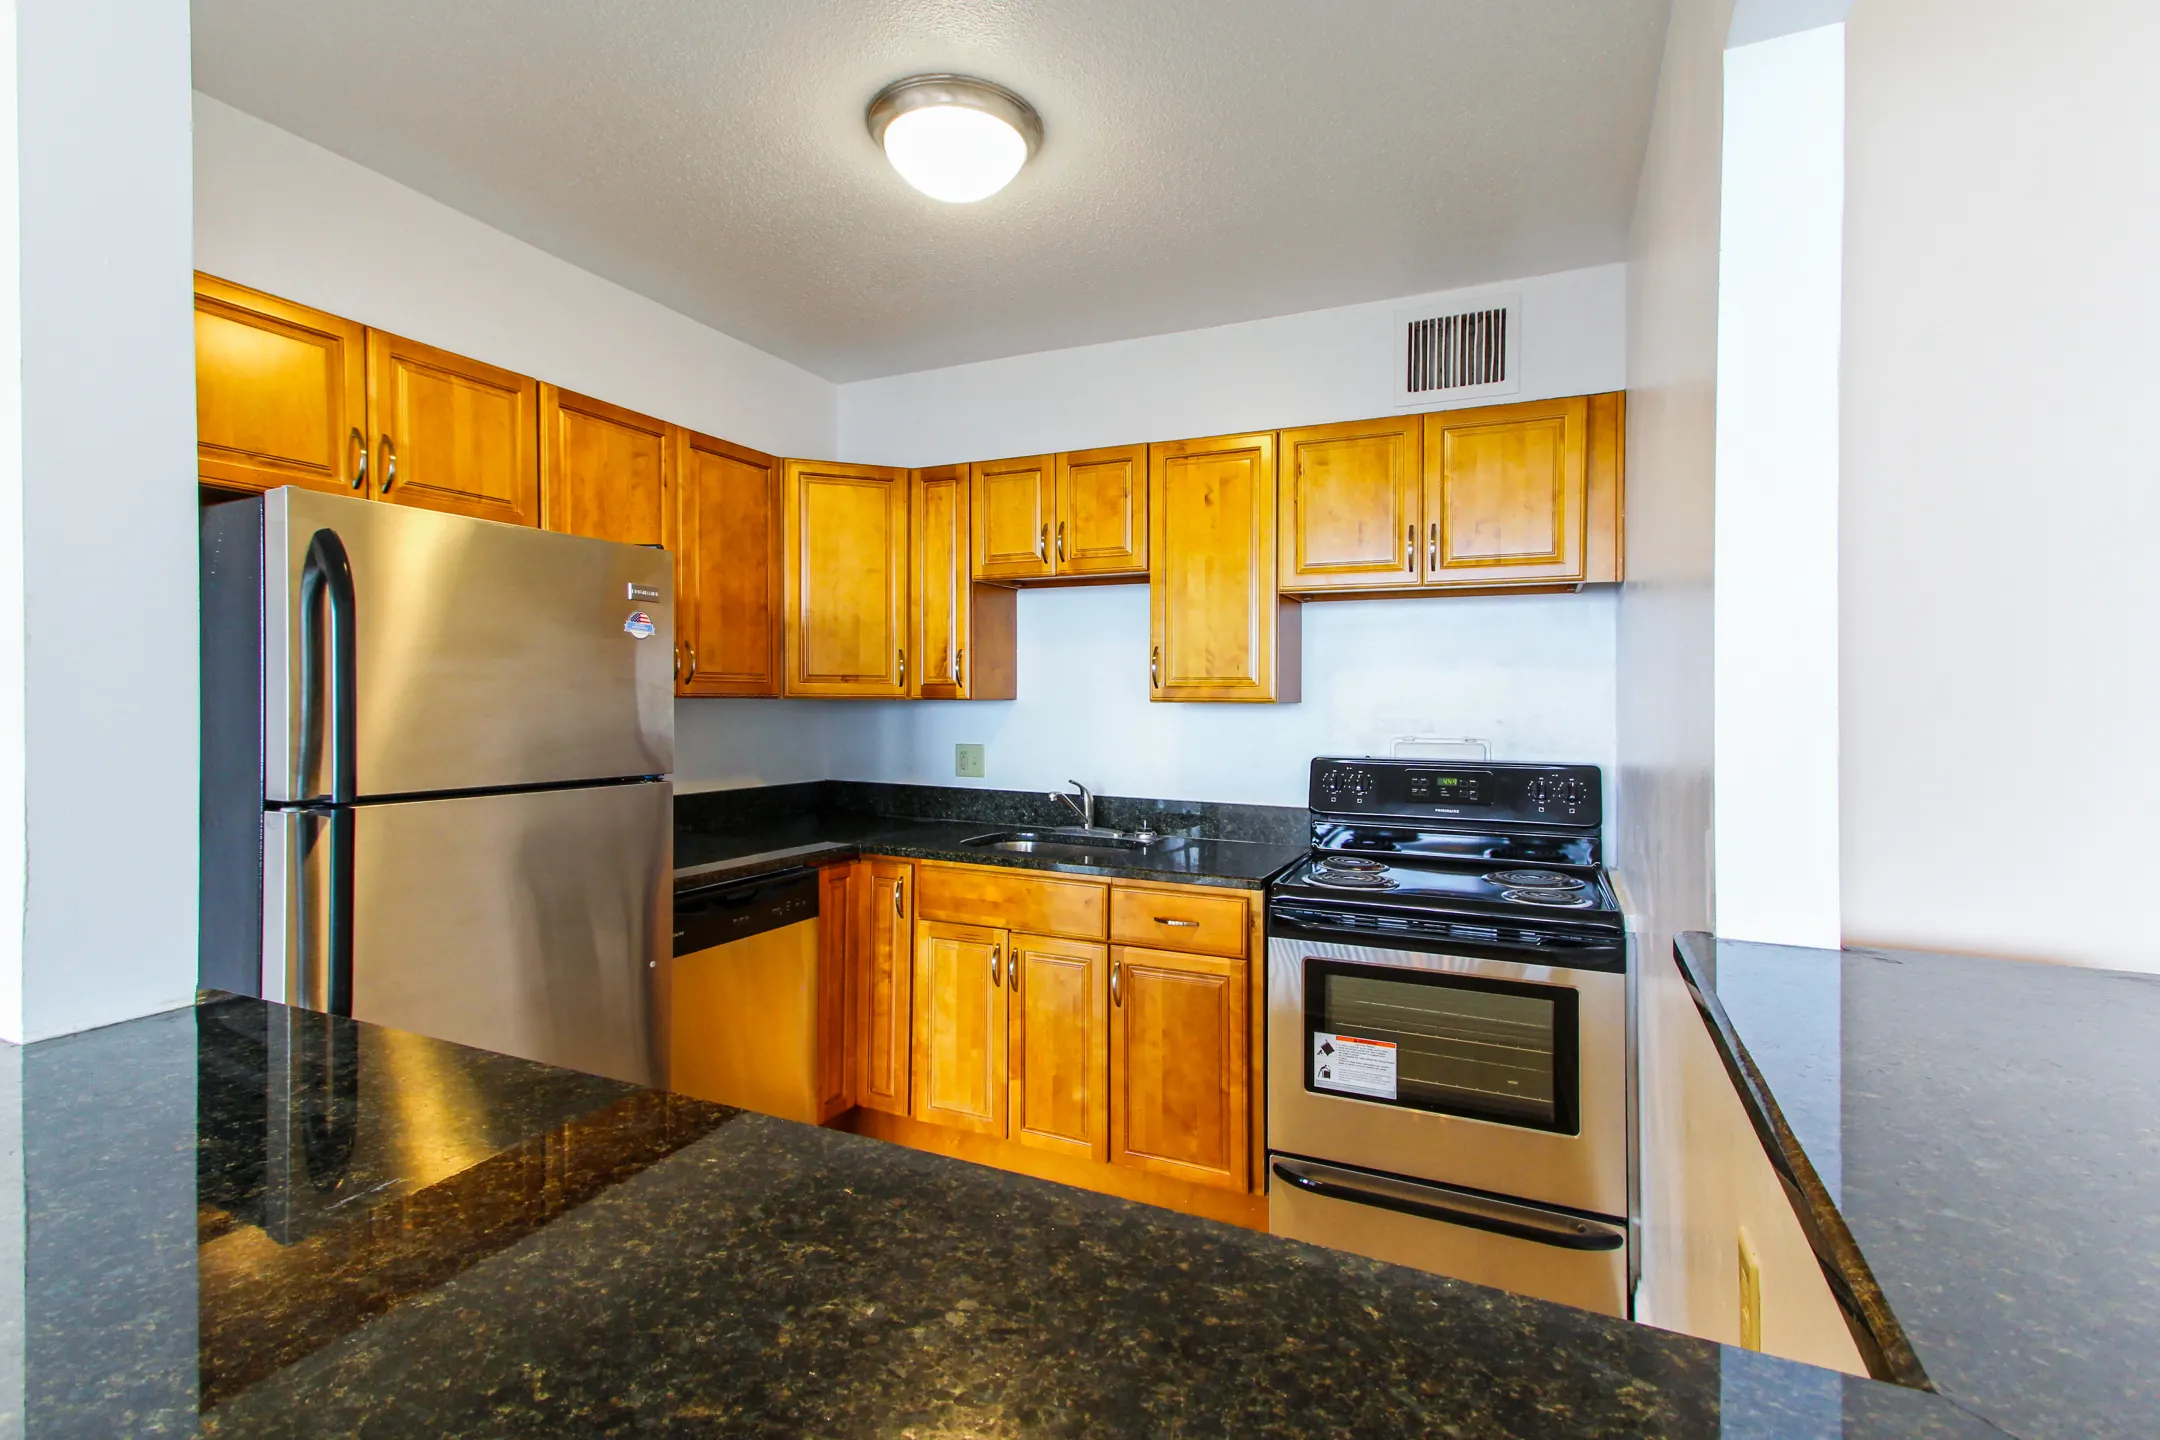 Kitchen - Lake Park Tower Apartments - Cleveland, OH